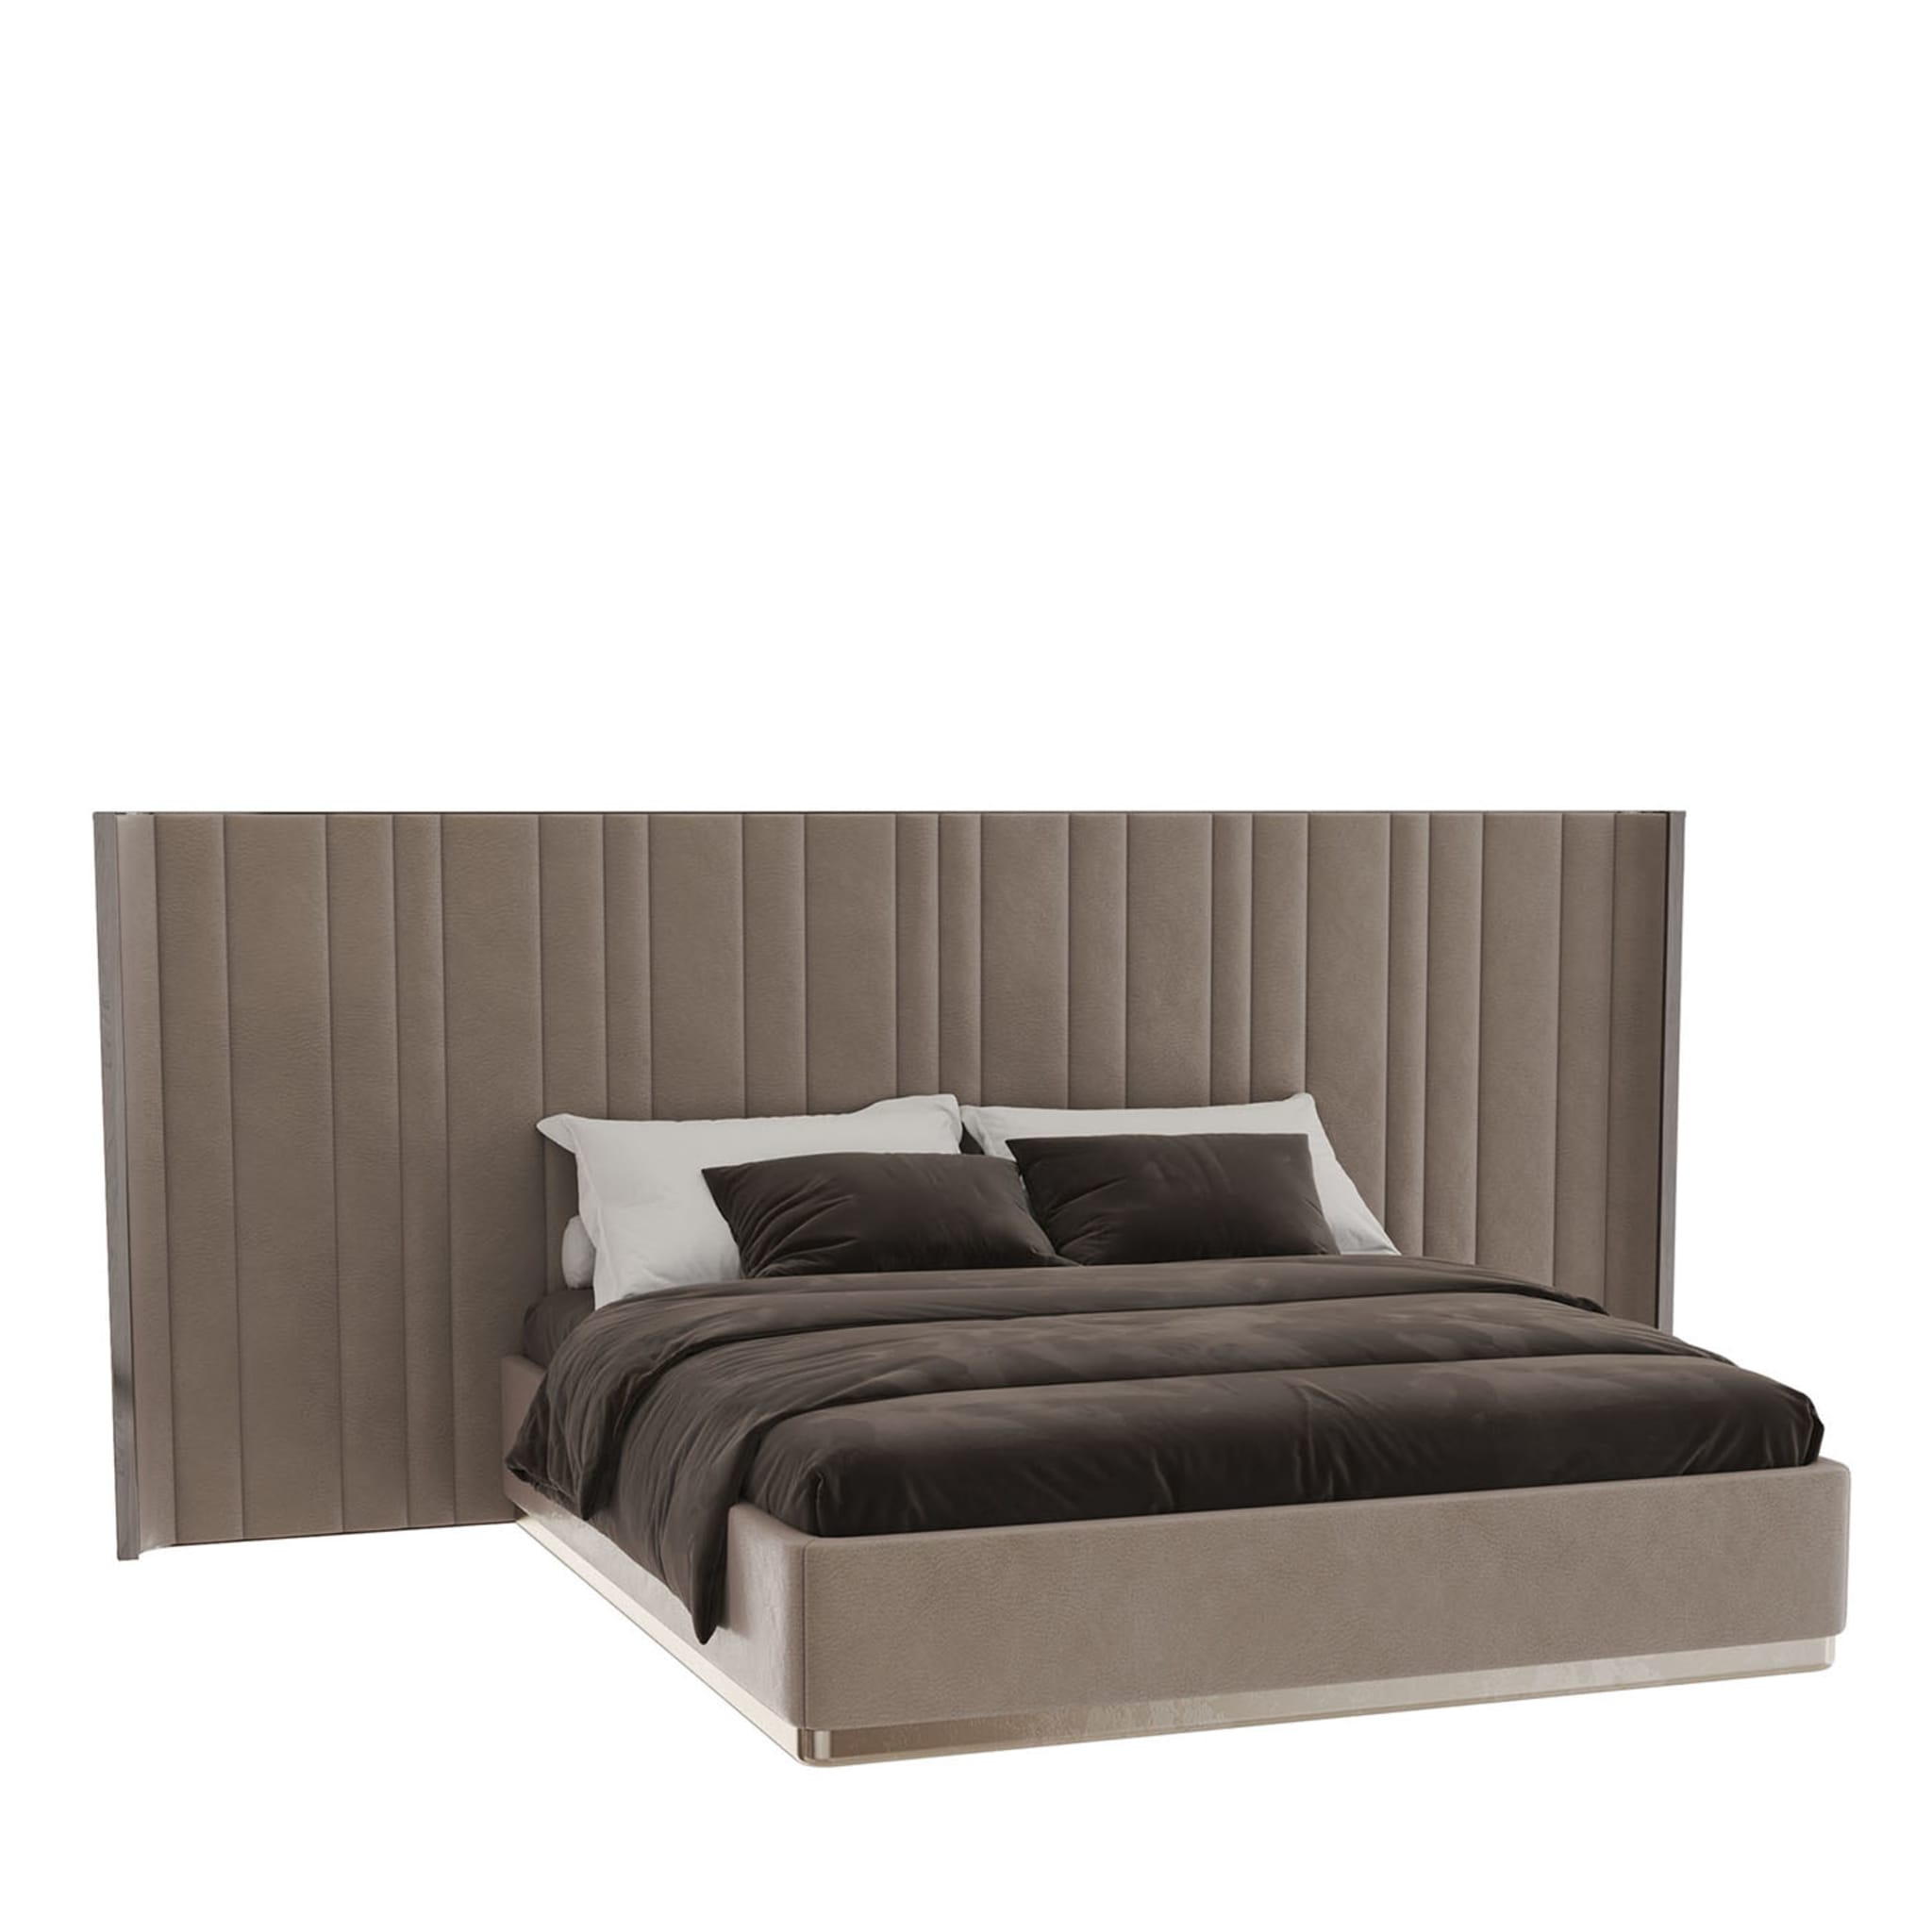 Saga 140 XL Italian Curved Bed In Nabuck Leather - Main view